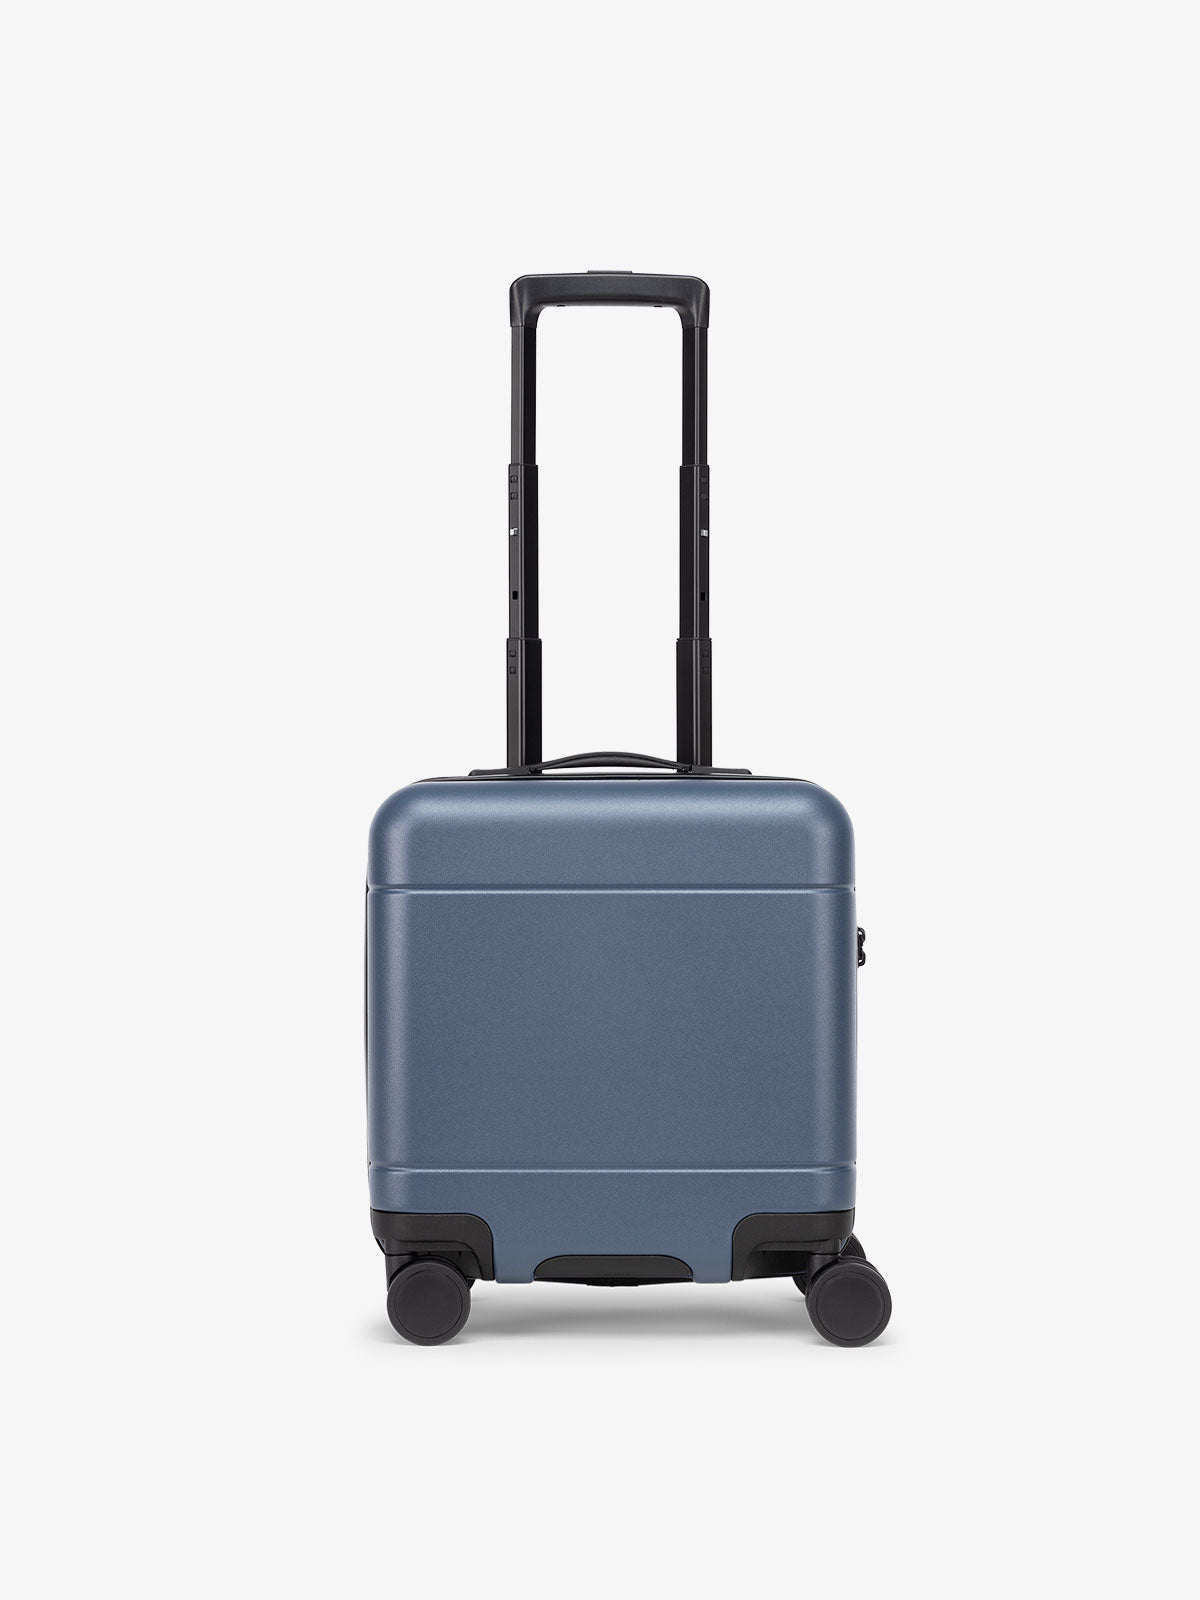 rolling luggage price